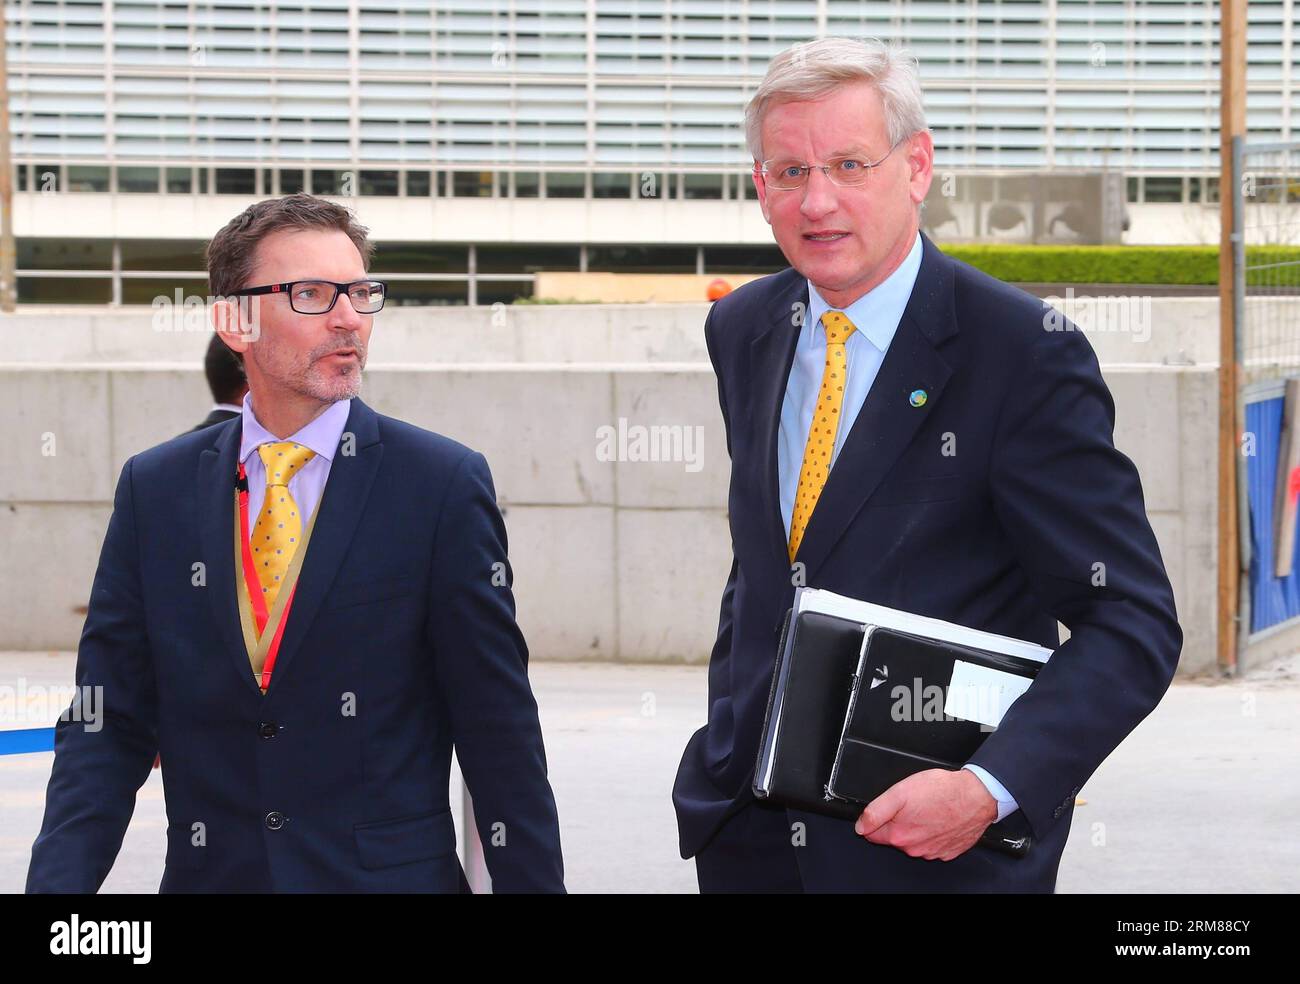 Bildt r hi-res images - and photography Alamy stock